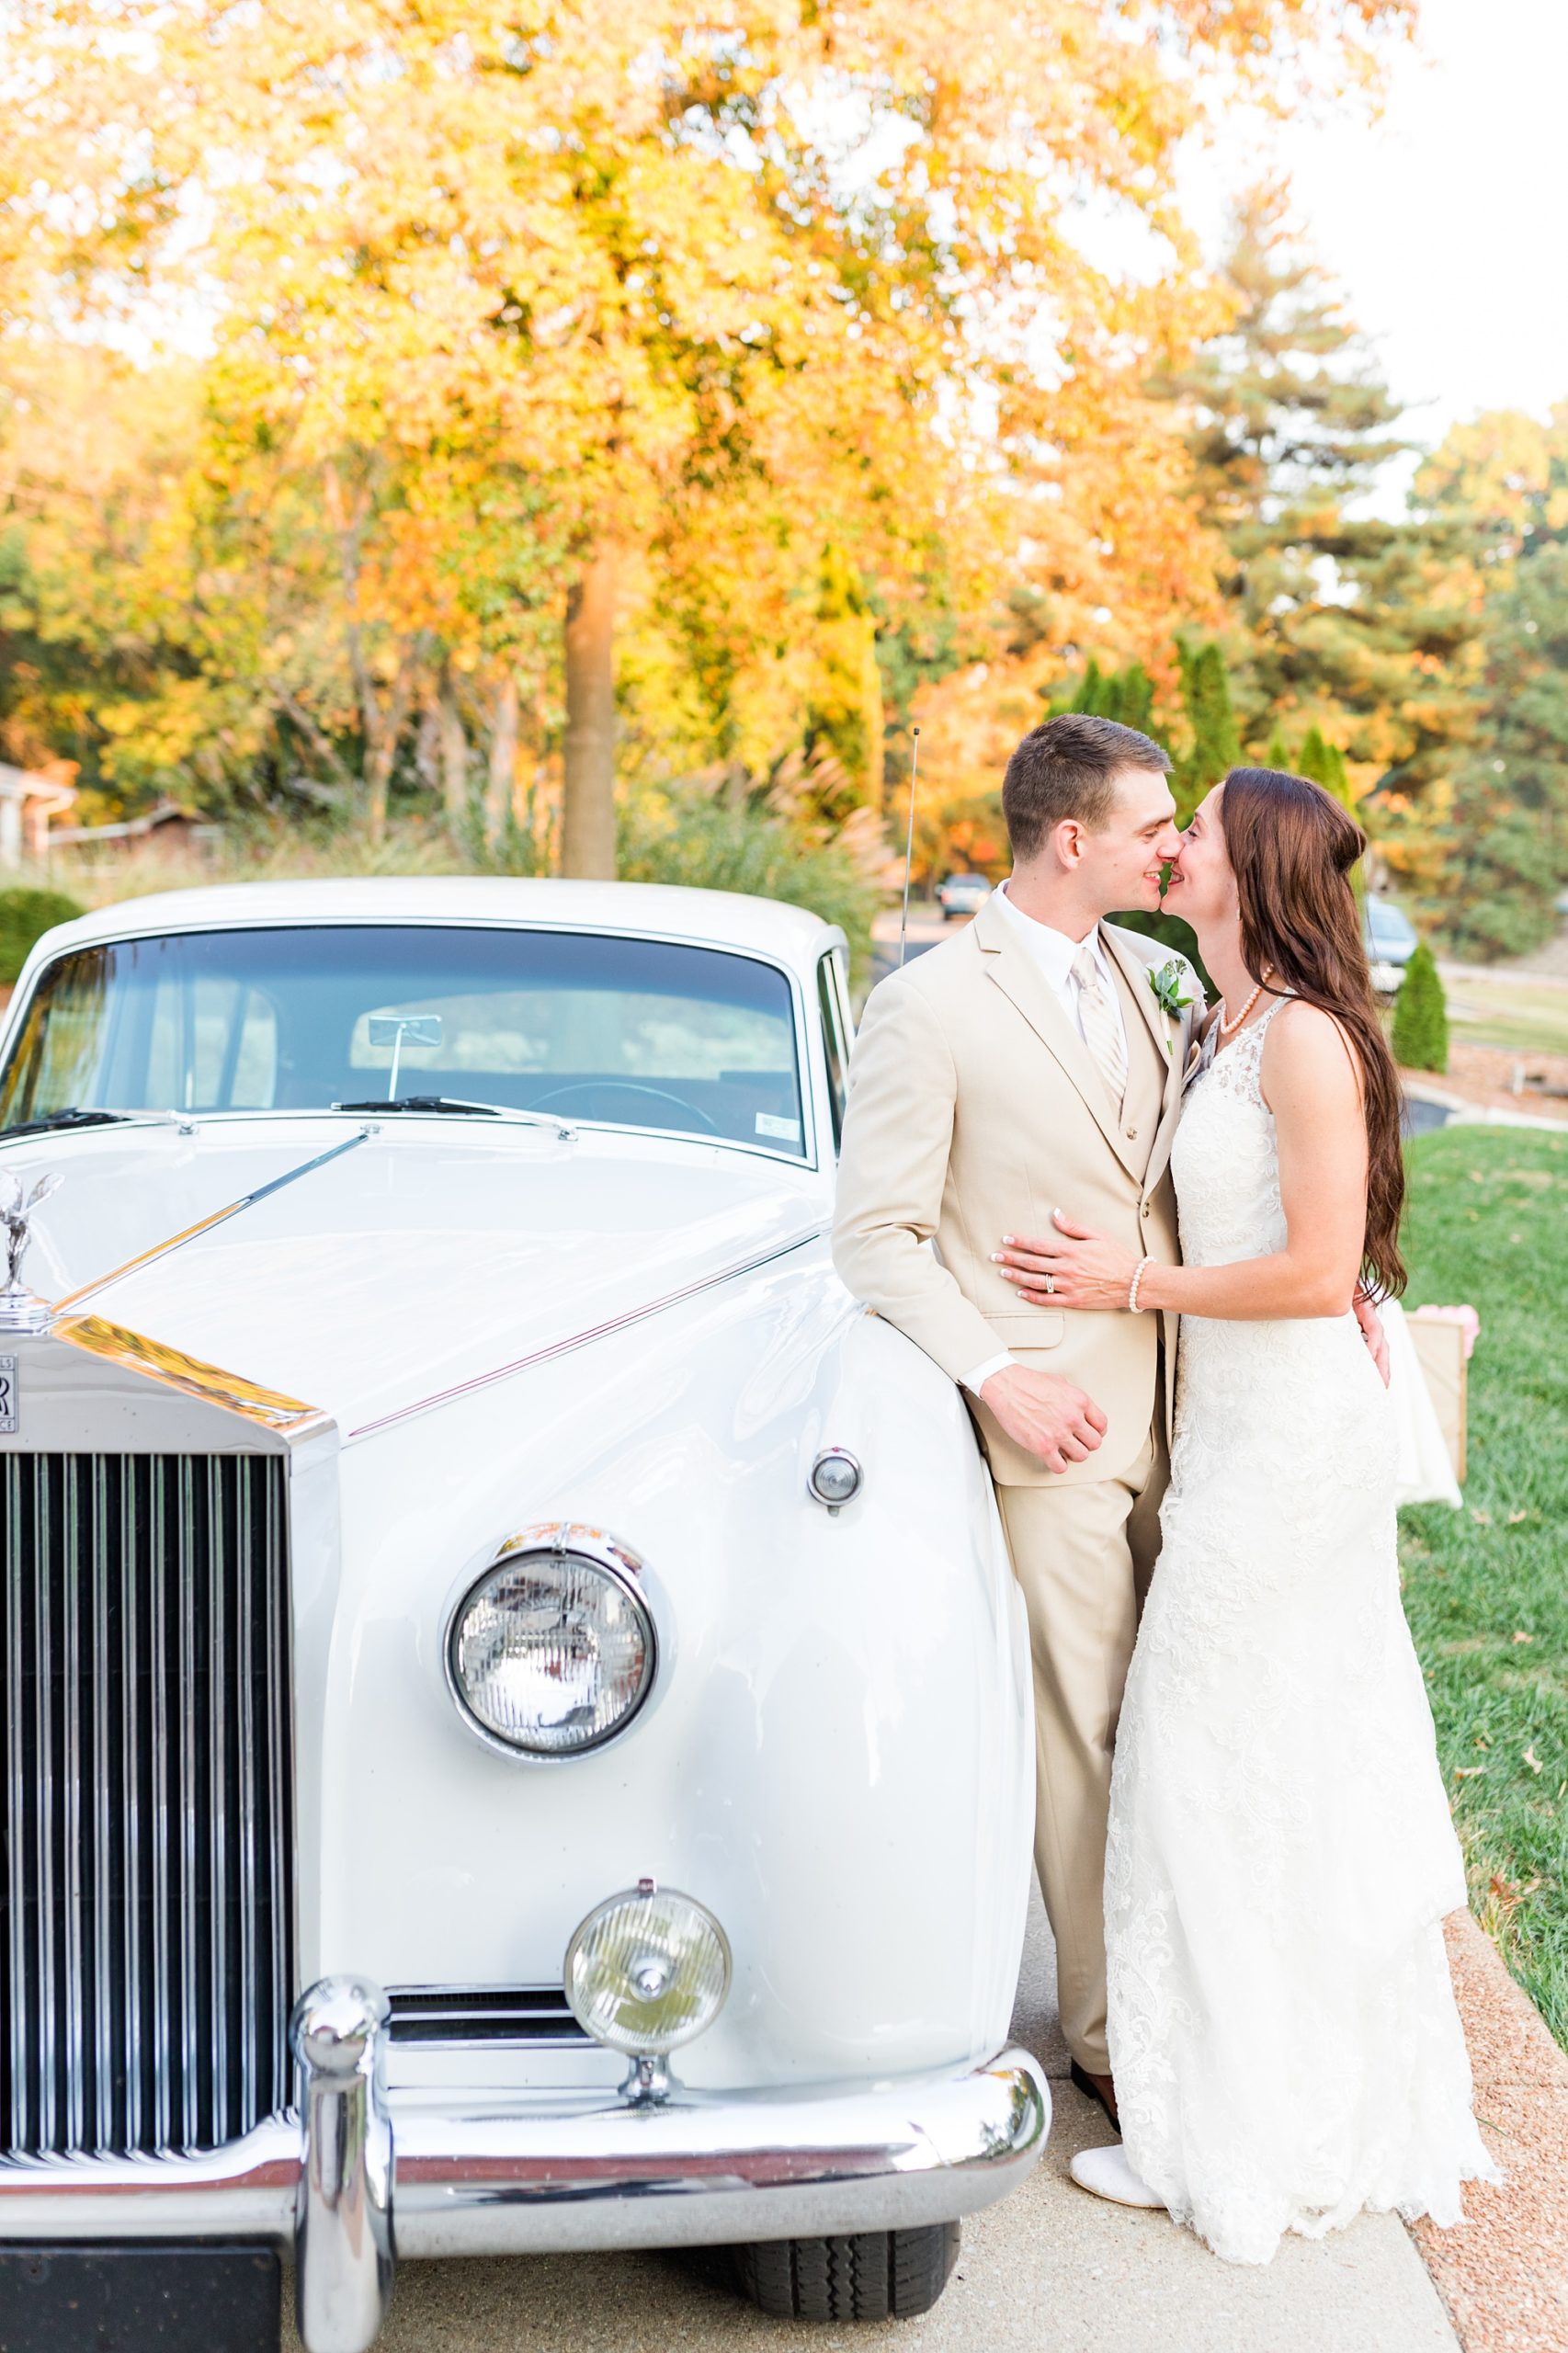 bride and groom kiss by vintage car during backyard wedding in Godfrey IL